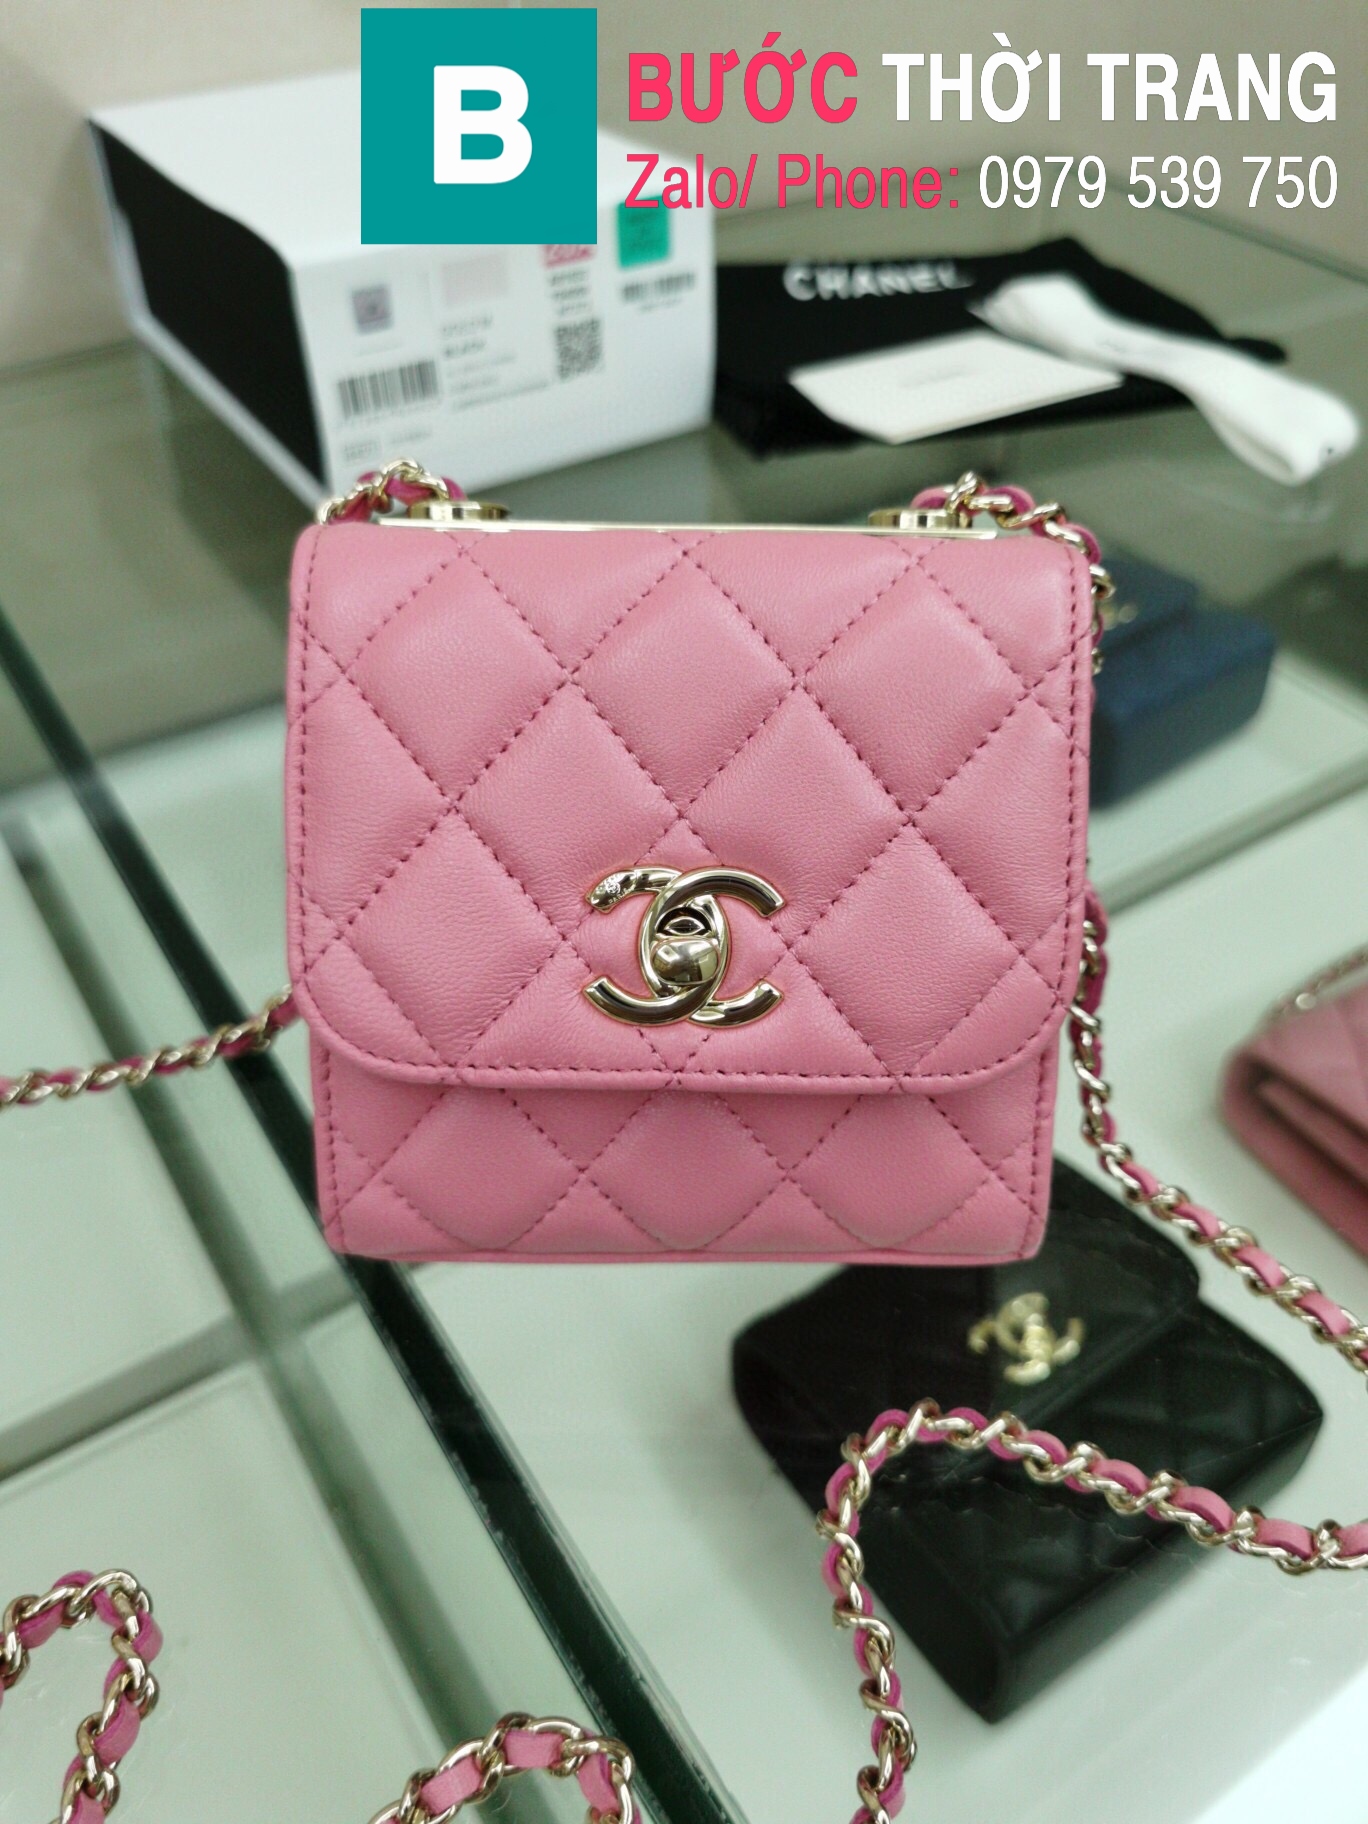 A Complete Guide to The Chanel Trendy CC Bag  PurseBop